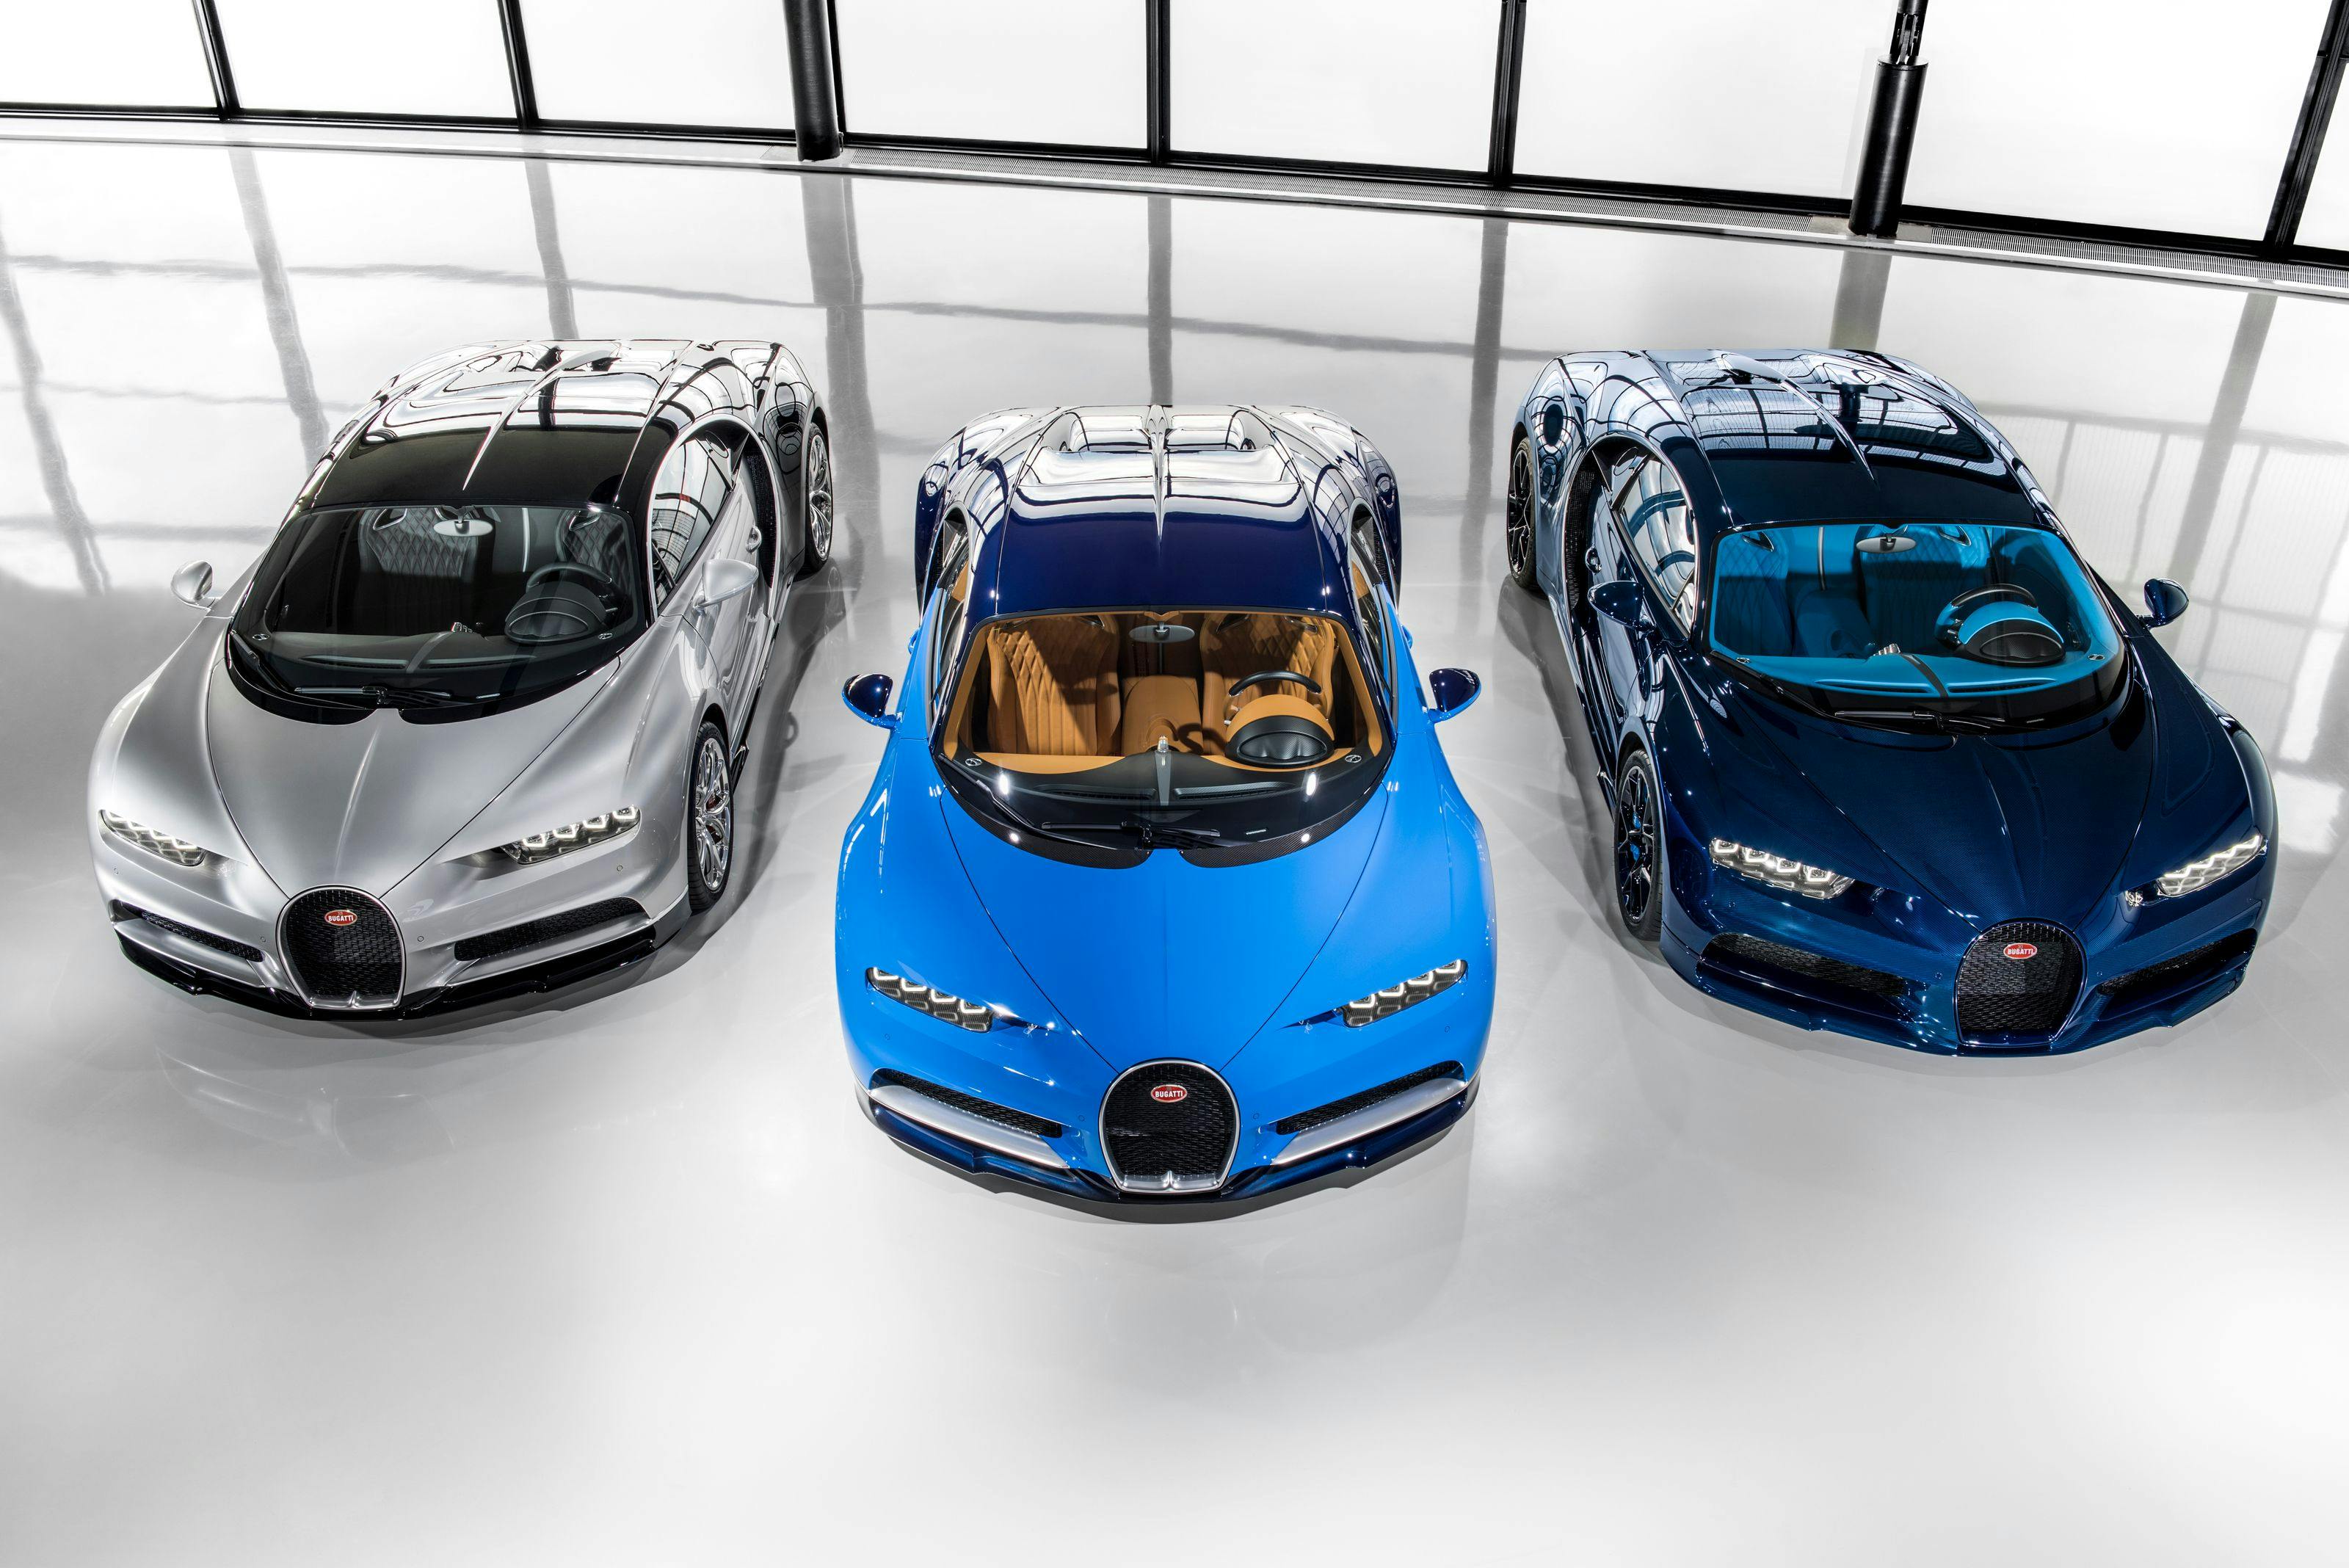 Bugatti delivers first Chiron super sports cars to customers